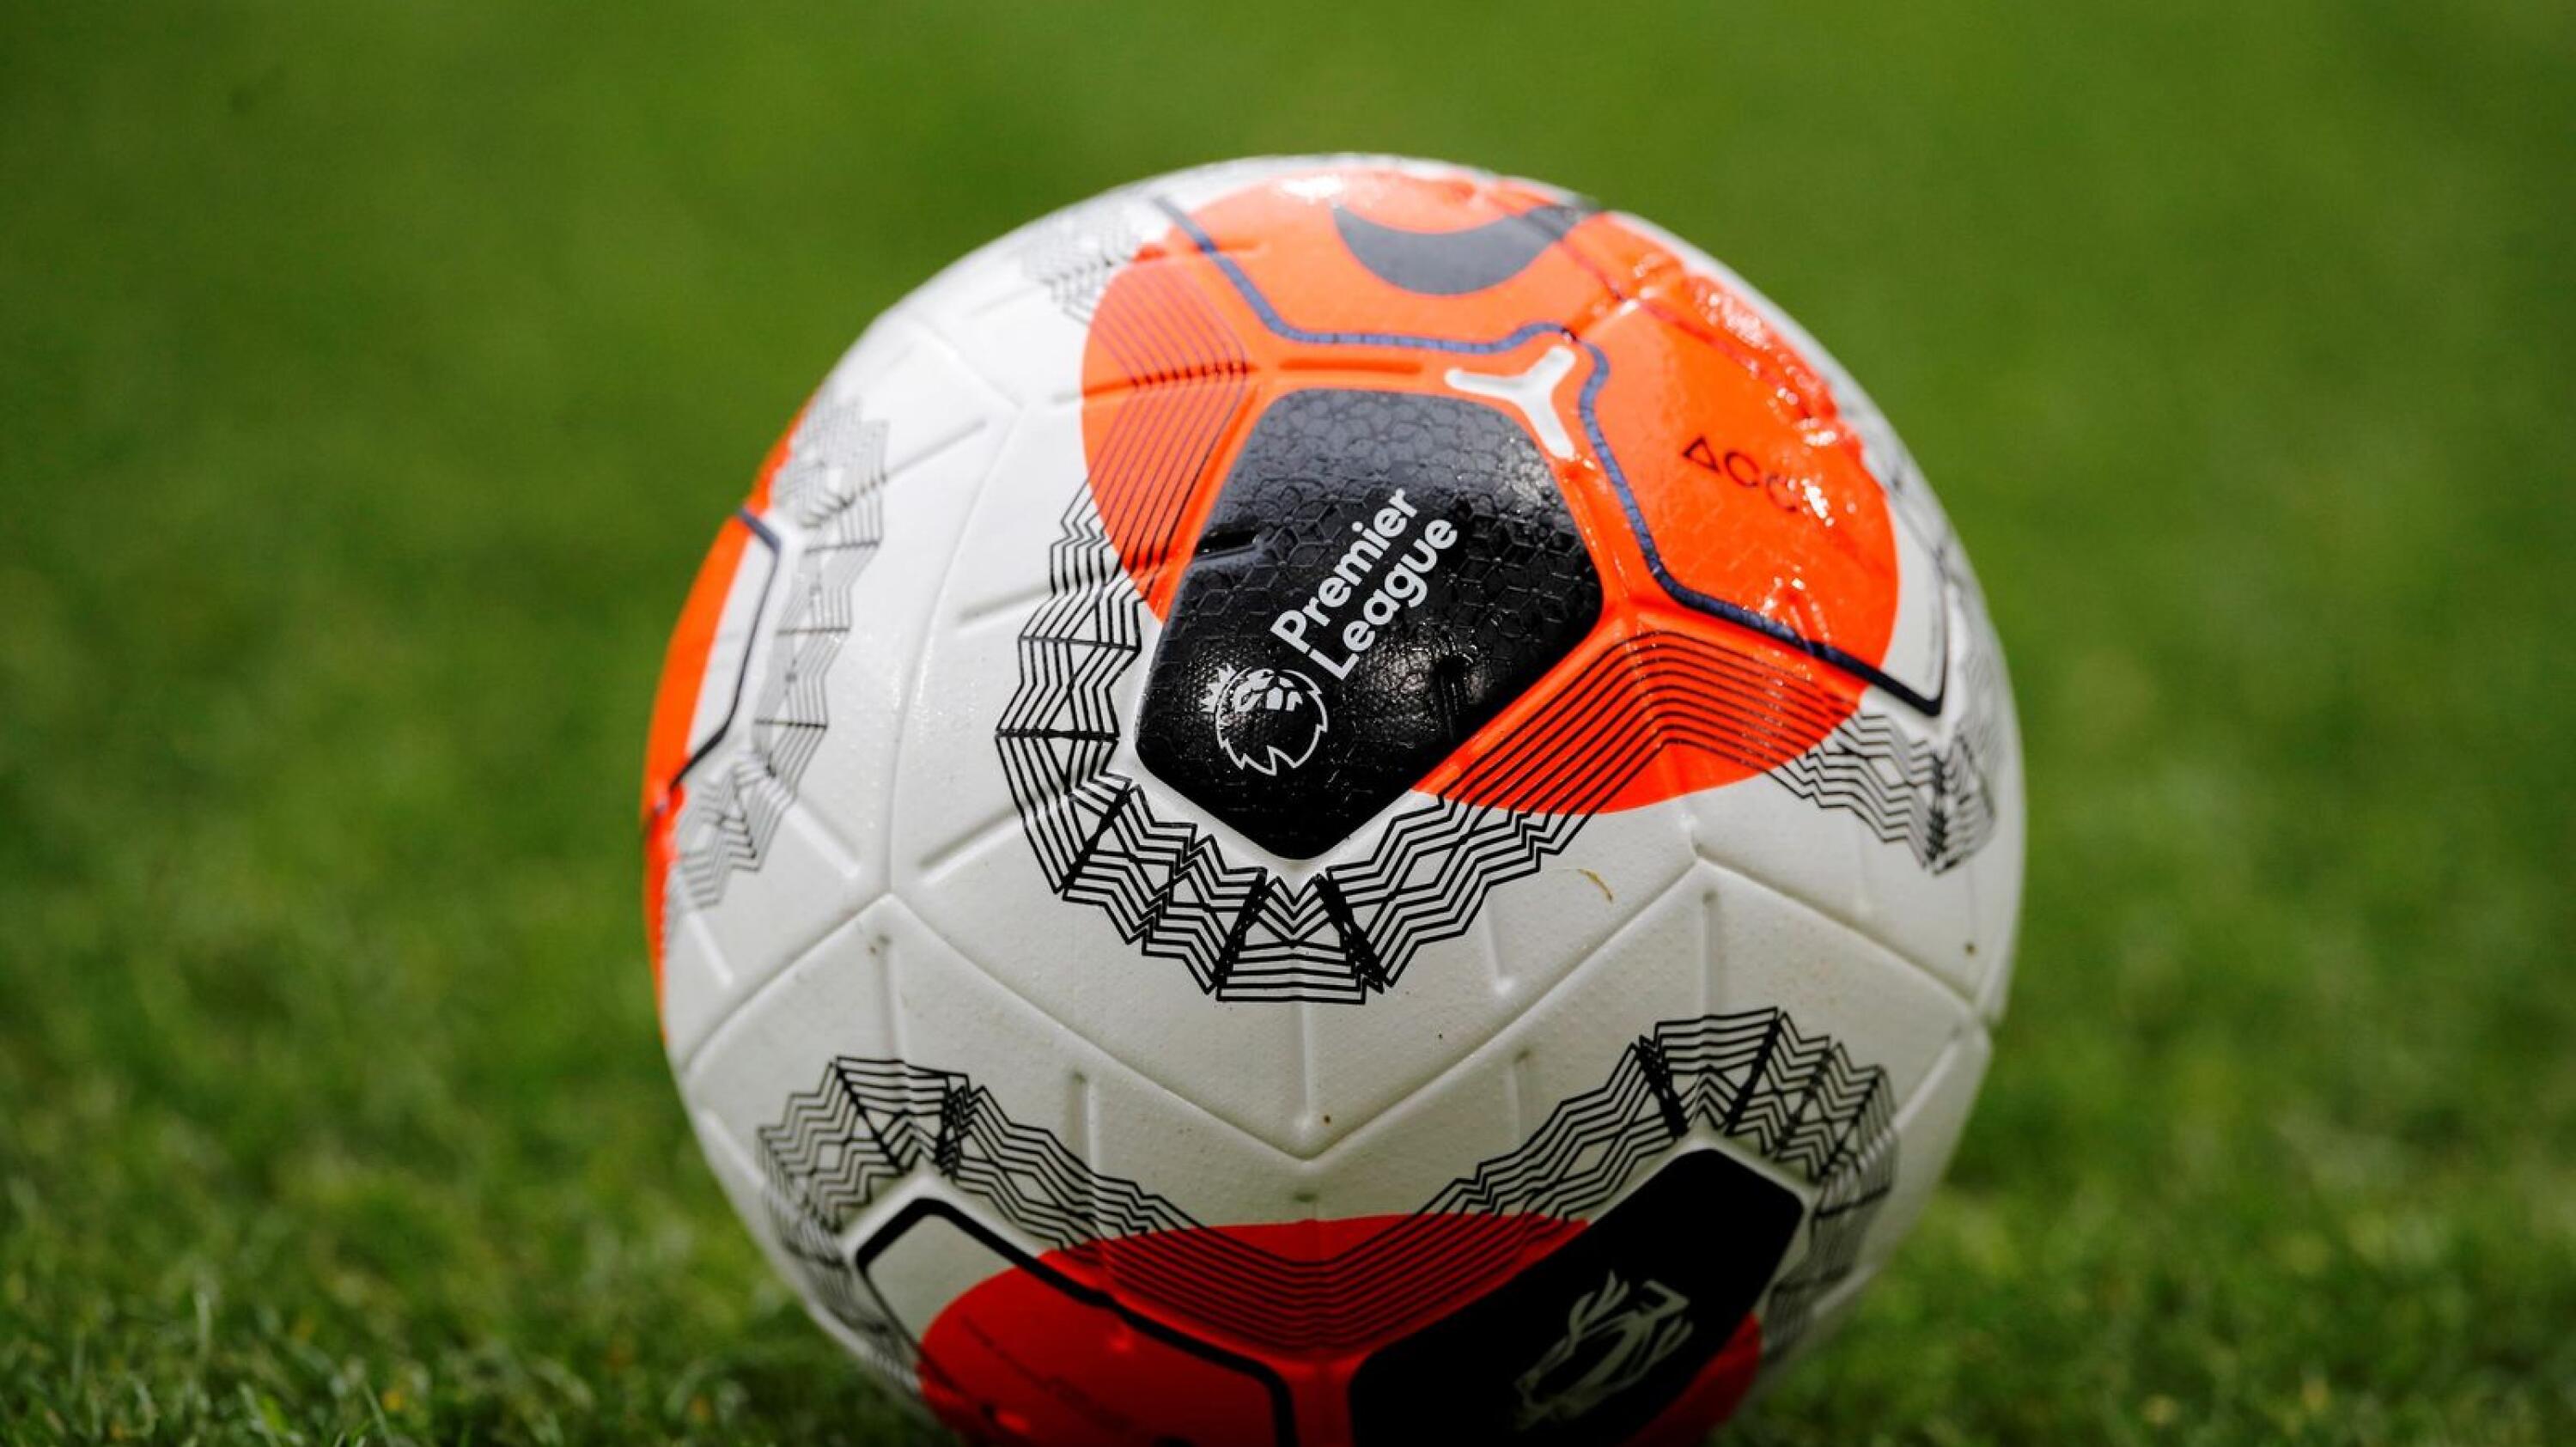 General view of the Premier League logo on a match ball